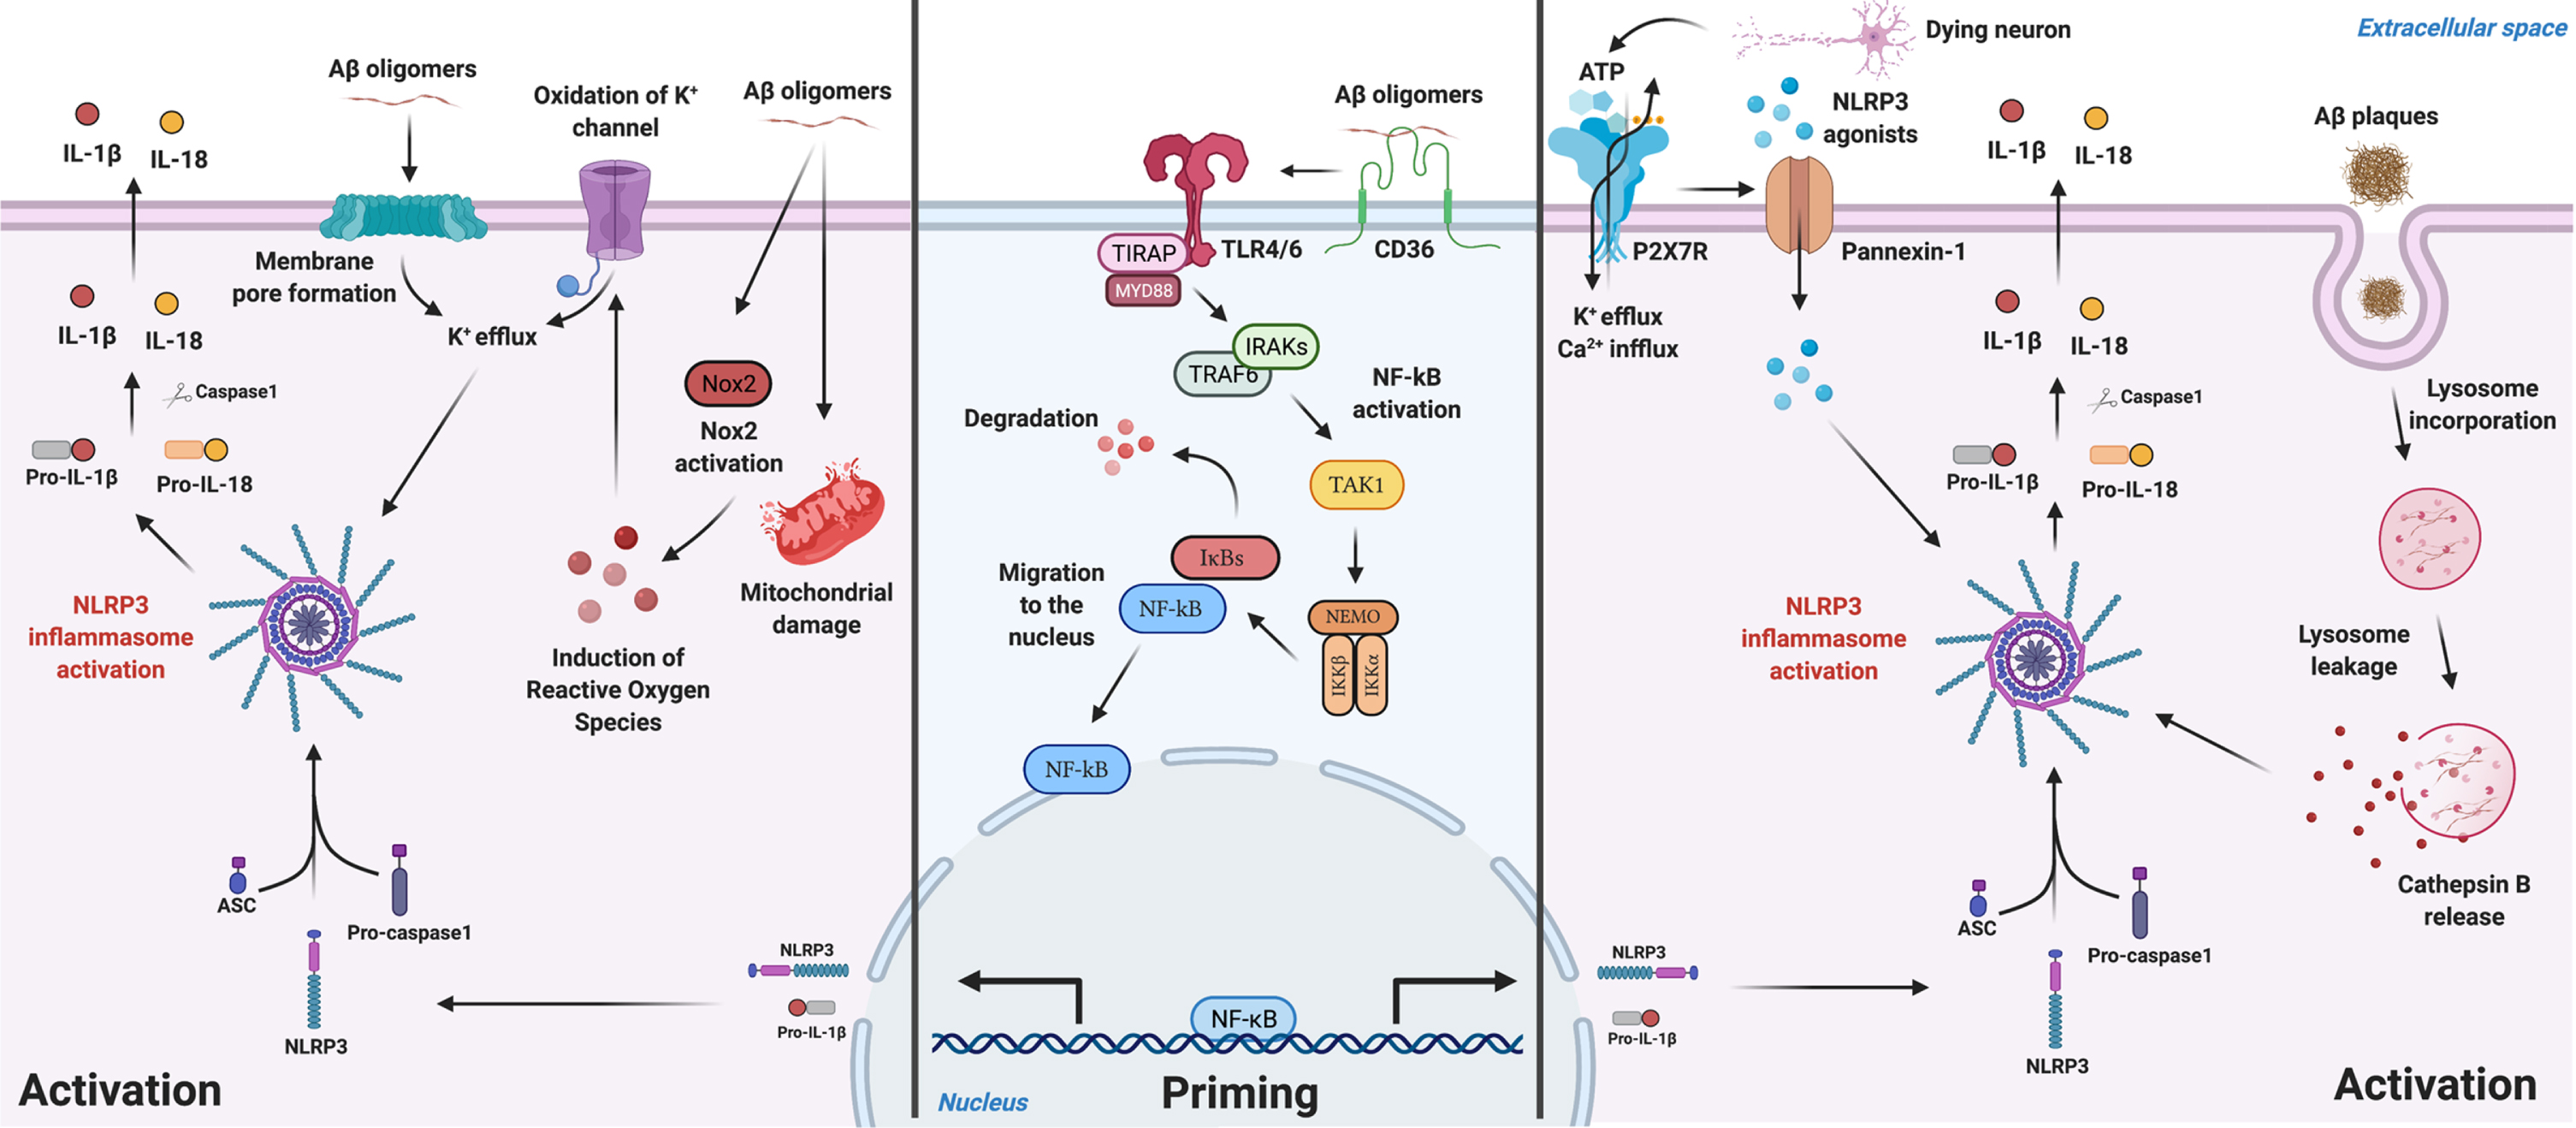 Schematic illustration for Aβ-mediated NLRP3 inflammasome priming and activation mechanisms described in microglia. Aβ species can work either as a priming stimulus (middle panel) or as an activating stimulus (left and right panels). As a priming signal, Aβ oligomers bind to the CD36 surface receptor, triggering the formation of a TLR4-TLR6 heterodimer. This heterodimer activates a cascade of signaling molecules resulting in the activation and nucleus translocation of the transcription factor NF-kB, that promotes the transcription of NLRP3 domain and of pro-IL-1β. Aβ plaques can act as an activating signal by two main mechanisms (right panel). Aβ is known to cause synaptic dysfunction and neuronal damage. Considering this, P2X7R is activated by ATP released from dying neurons and recruits the Pannexin-1 channel that allows the entrance of NLRP3 agonists to the cell. Also, ATP binding to the purinergic receptor induces K+ efflux and Ca2 + influx, known to promote NLRP3 activation. On the other hand, Aβ plaques can also be phagocytized and incorporated into lysosomes, boosting lysosomal destabilization and consequent content release. Cathepsin B, a lysosomal proteolytic enzyme, promotes the assembly of the inflammasome by a still unknown mechanism. Aβ oligomers are also able to activate NLRP3 through a mechanism that does not involve phagocytosis (left panel). Soluble oligomeric Aβ species can induce pore formation in the cell membrane and ROS production, which then promotes oxidation of K+ channels. These events might culminate in K+ efflux promoting the activation of the inflammasome. The assembly and activation of NLRP3, independently of the mechanism involved, ultimately results in the production and release of the inflammatory cytokines IL-1β and IL-18. Created with BioRender.com.